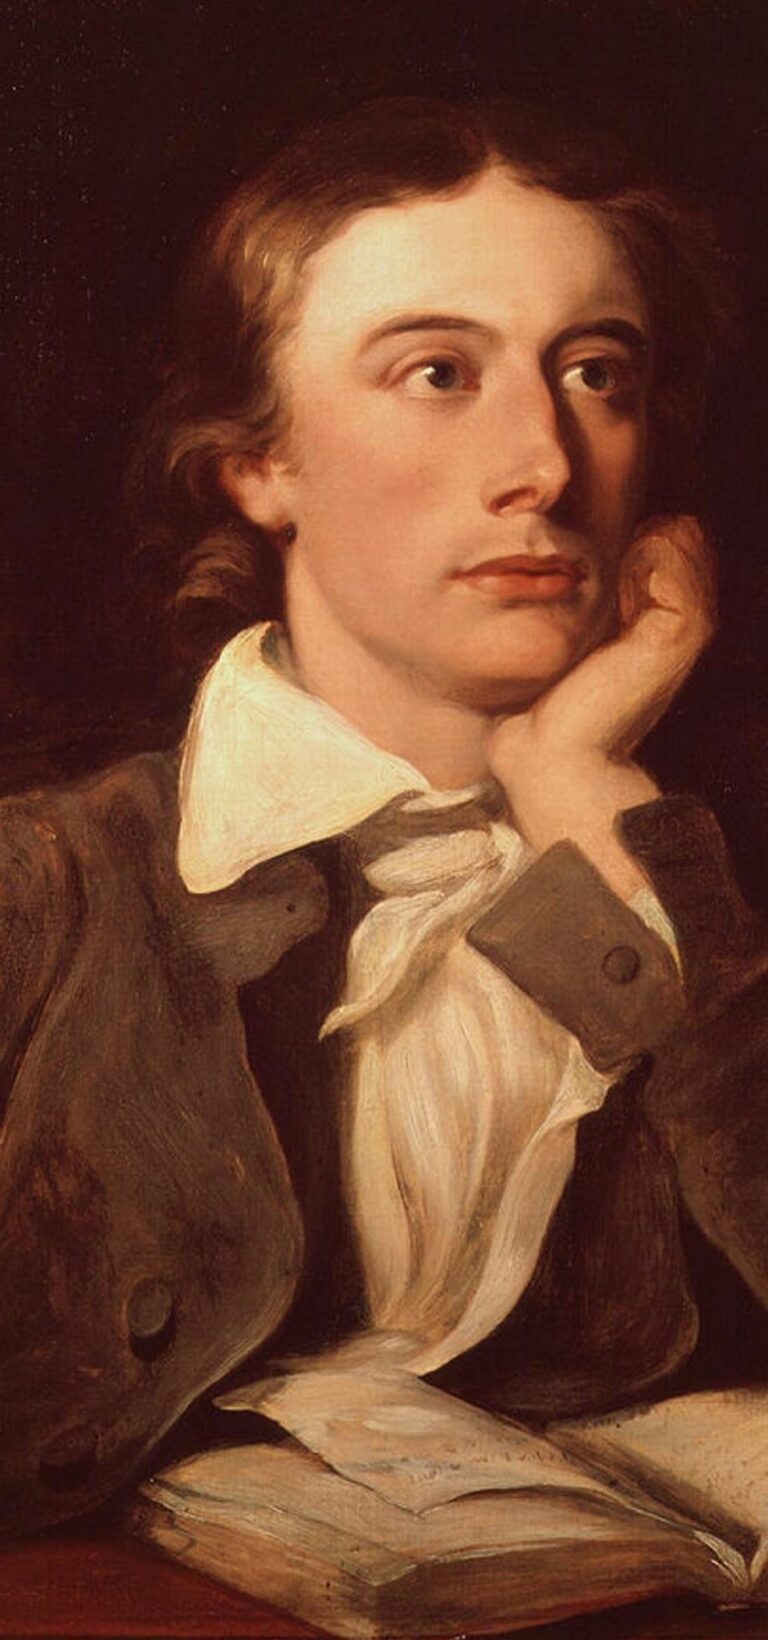 In what work did poet John Keats first employ the term “negative capability”?